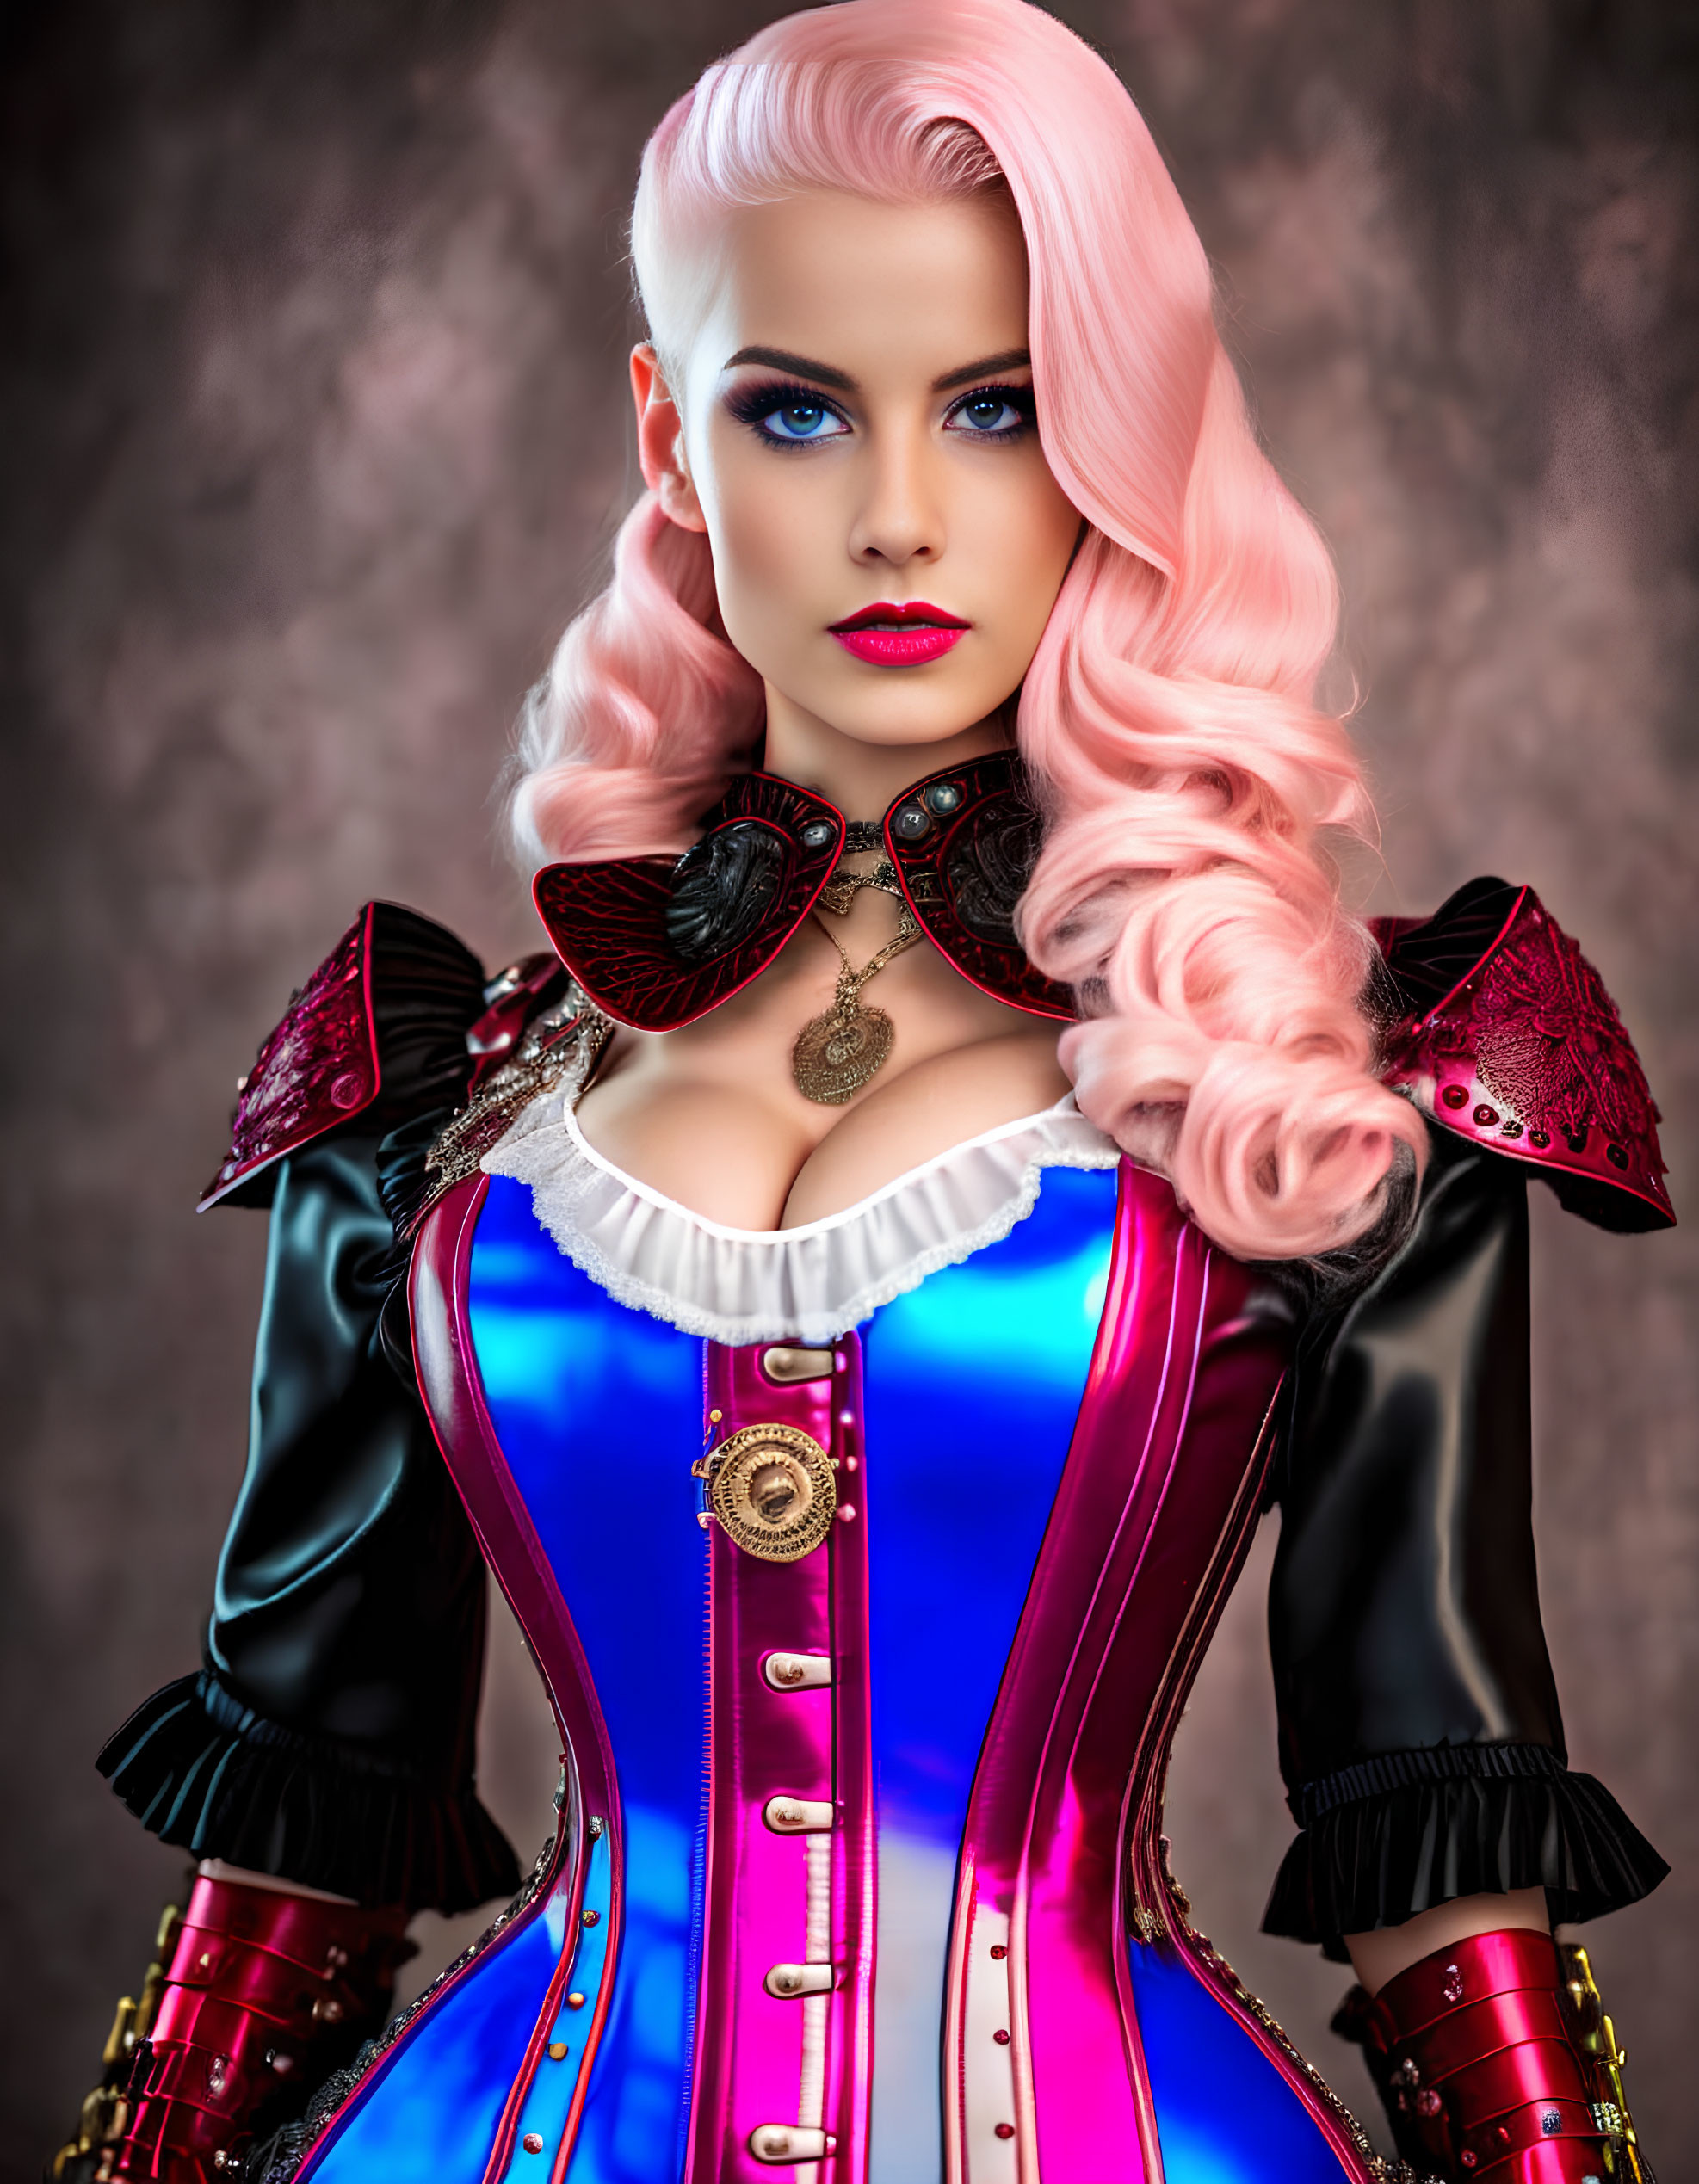 Vibrant pink-haired woman in detailed corset and ruffled collar portrait